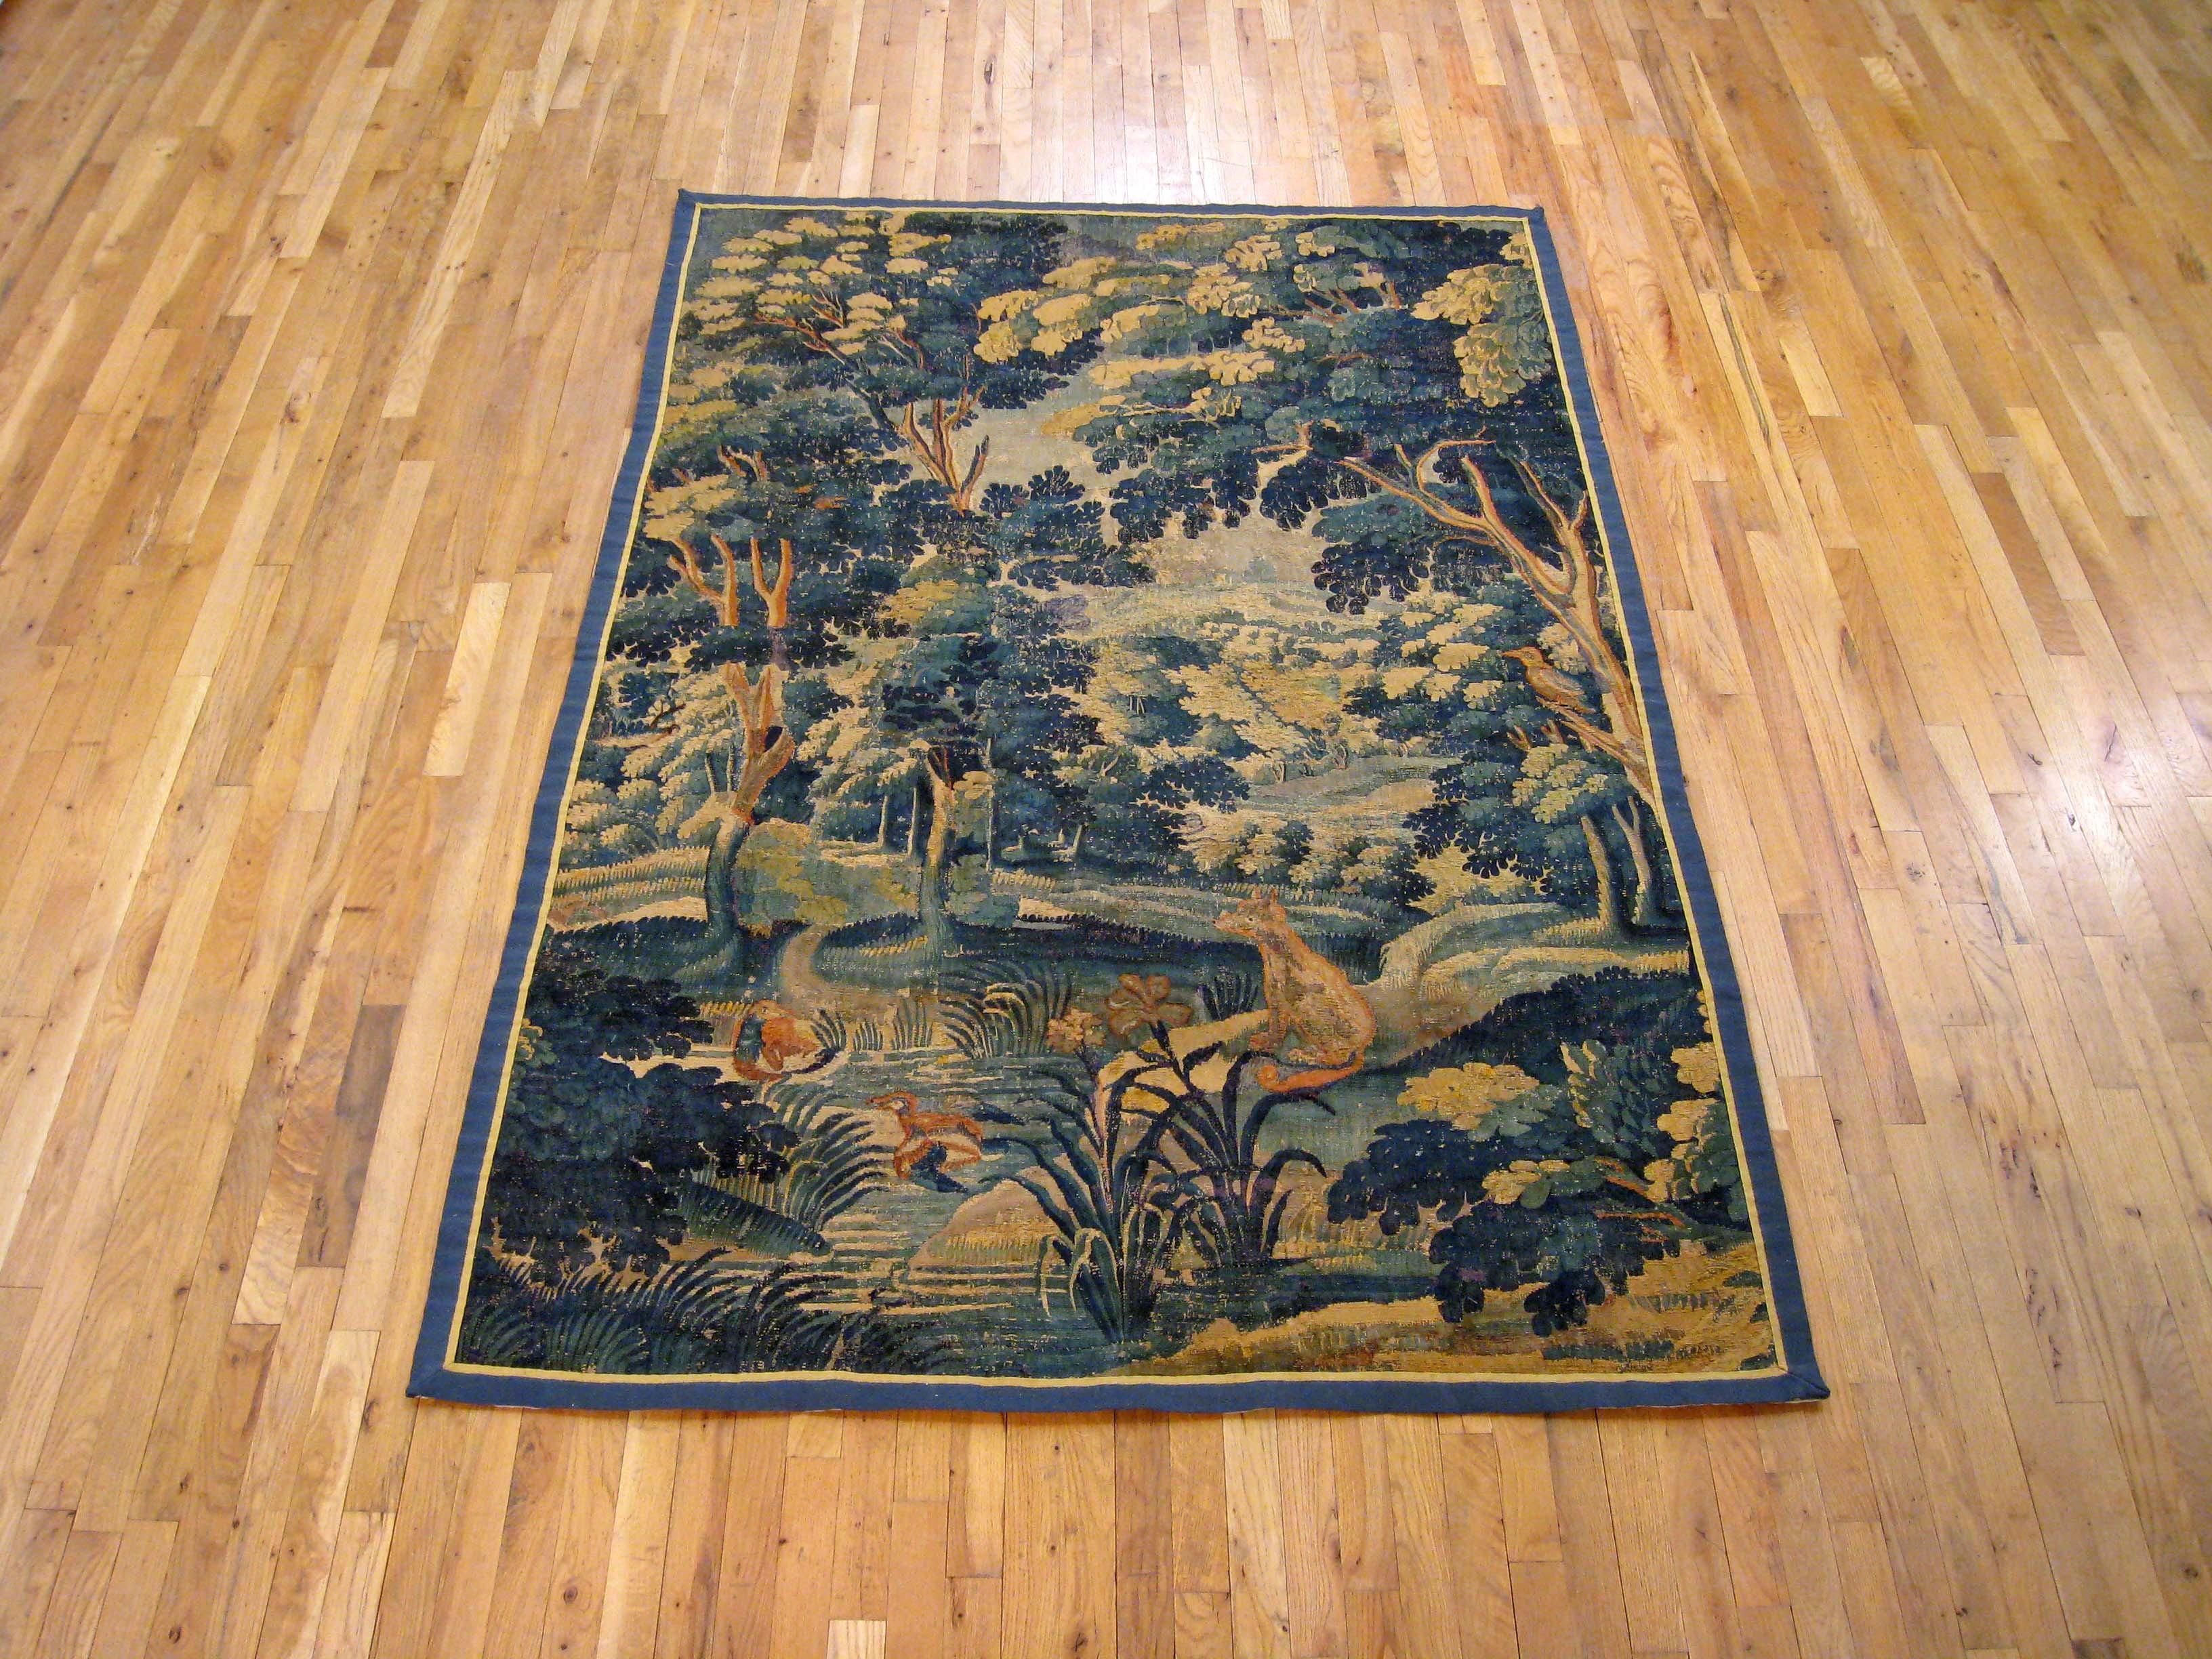 A Flemish verdure landscape tapestry from the 17th century, featuring a fox reposing by a pond in a verdant forest setting, with small bushes in the foreground, large trees in the middle distance, and further greenery in the background. Enclosed